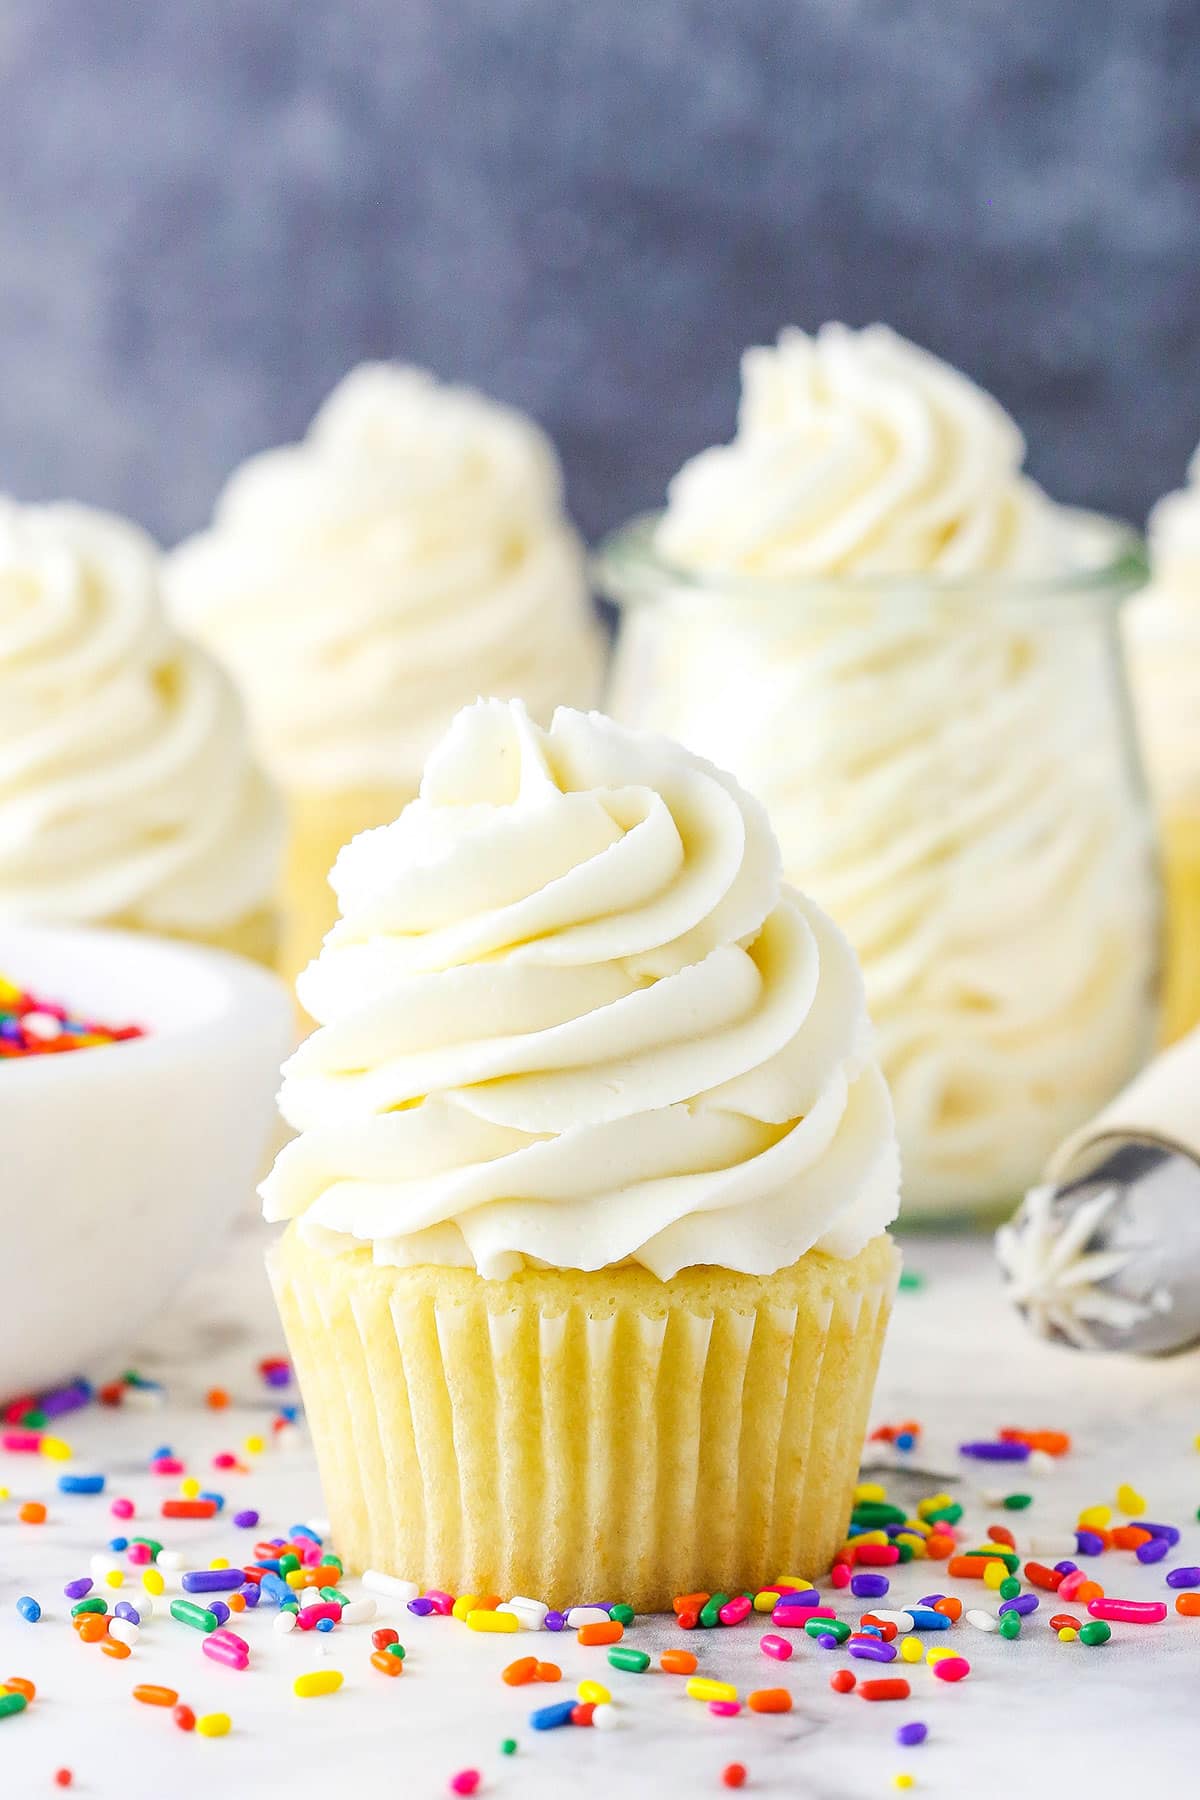 19 Cake Frosting Recipes So Good You'll Lick the Bowl | Epicurious